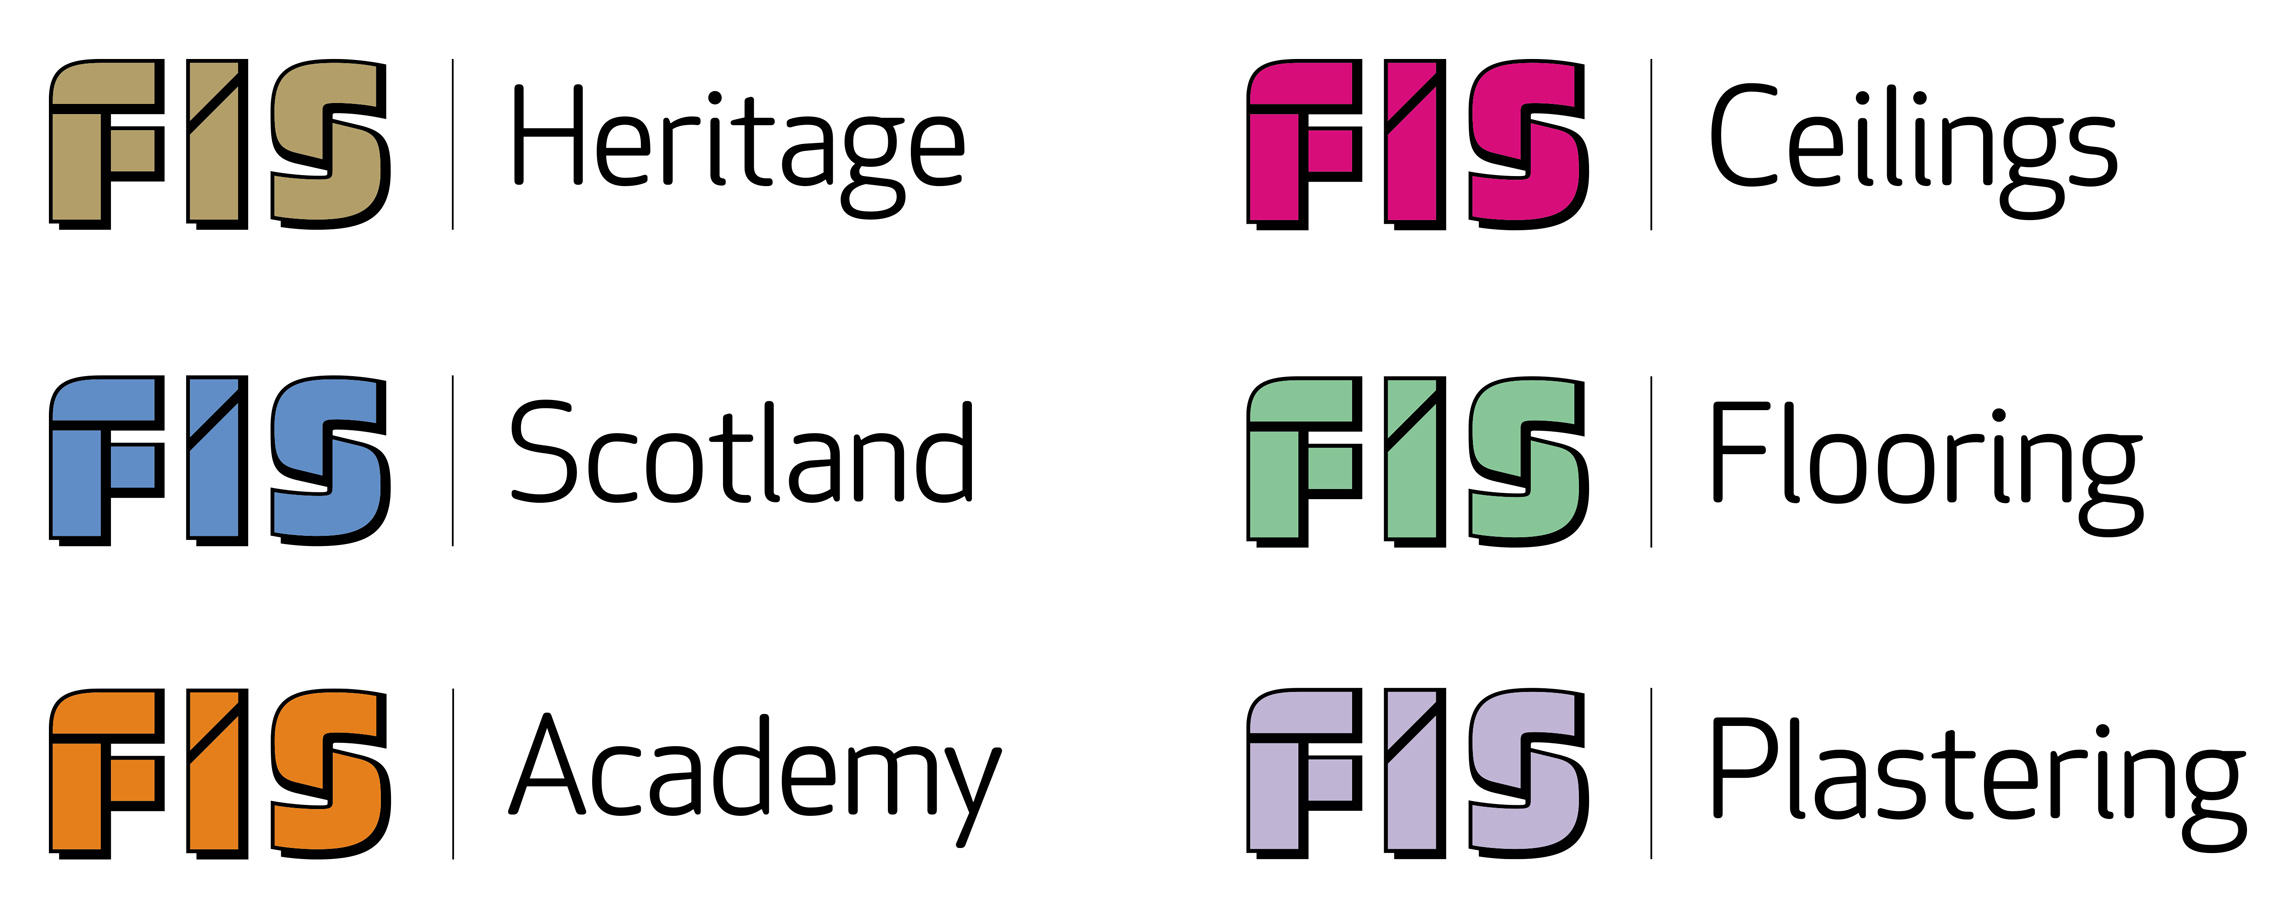 FIS finishes and interiors sector rebrand brand architecture